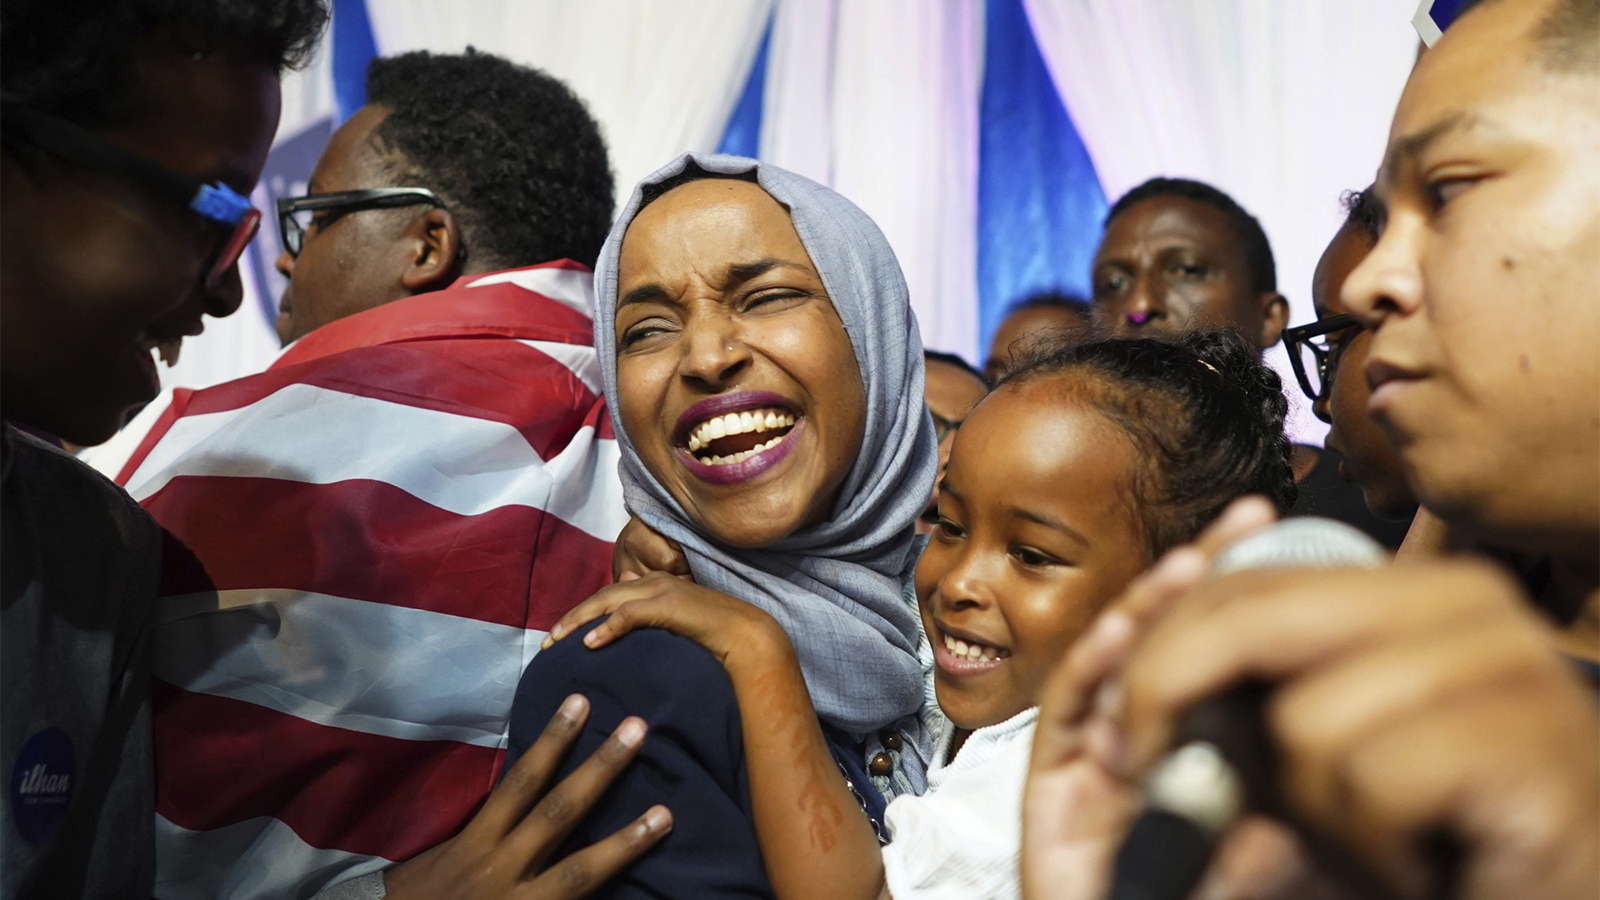 Minnesota state Rep. Ilhan Omar, center, celebrates after her congressional 5th District primary victory on Aug. 14, 2018, in Minneapolis. Omar will be the first woman in U.S. Congress to wear a hijab.(Mark Vancleave/Star Tribune via AP)